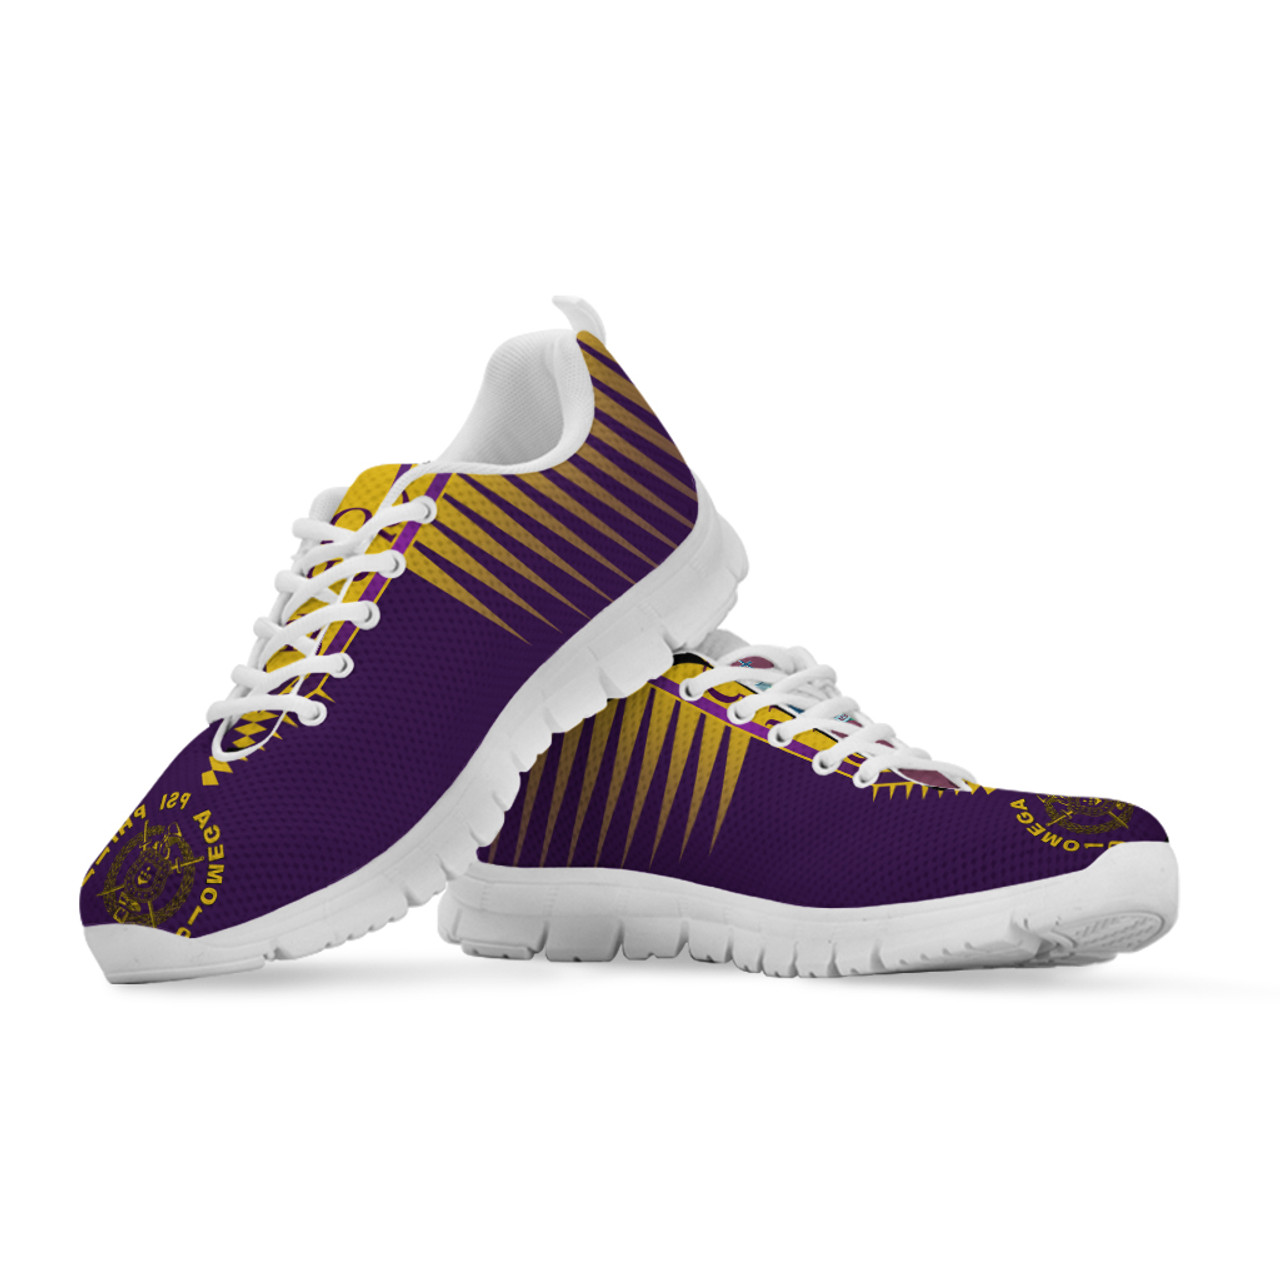 Omega Psi Phi Sneakers Fraternity Original Style